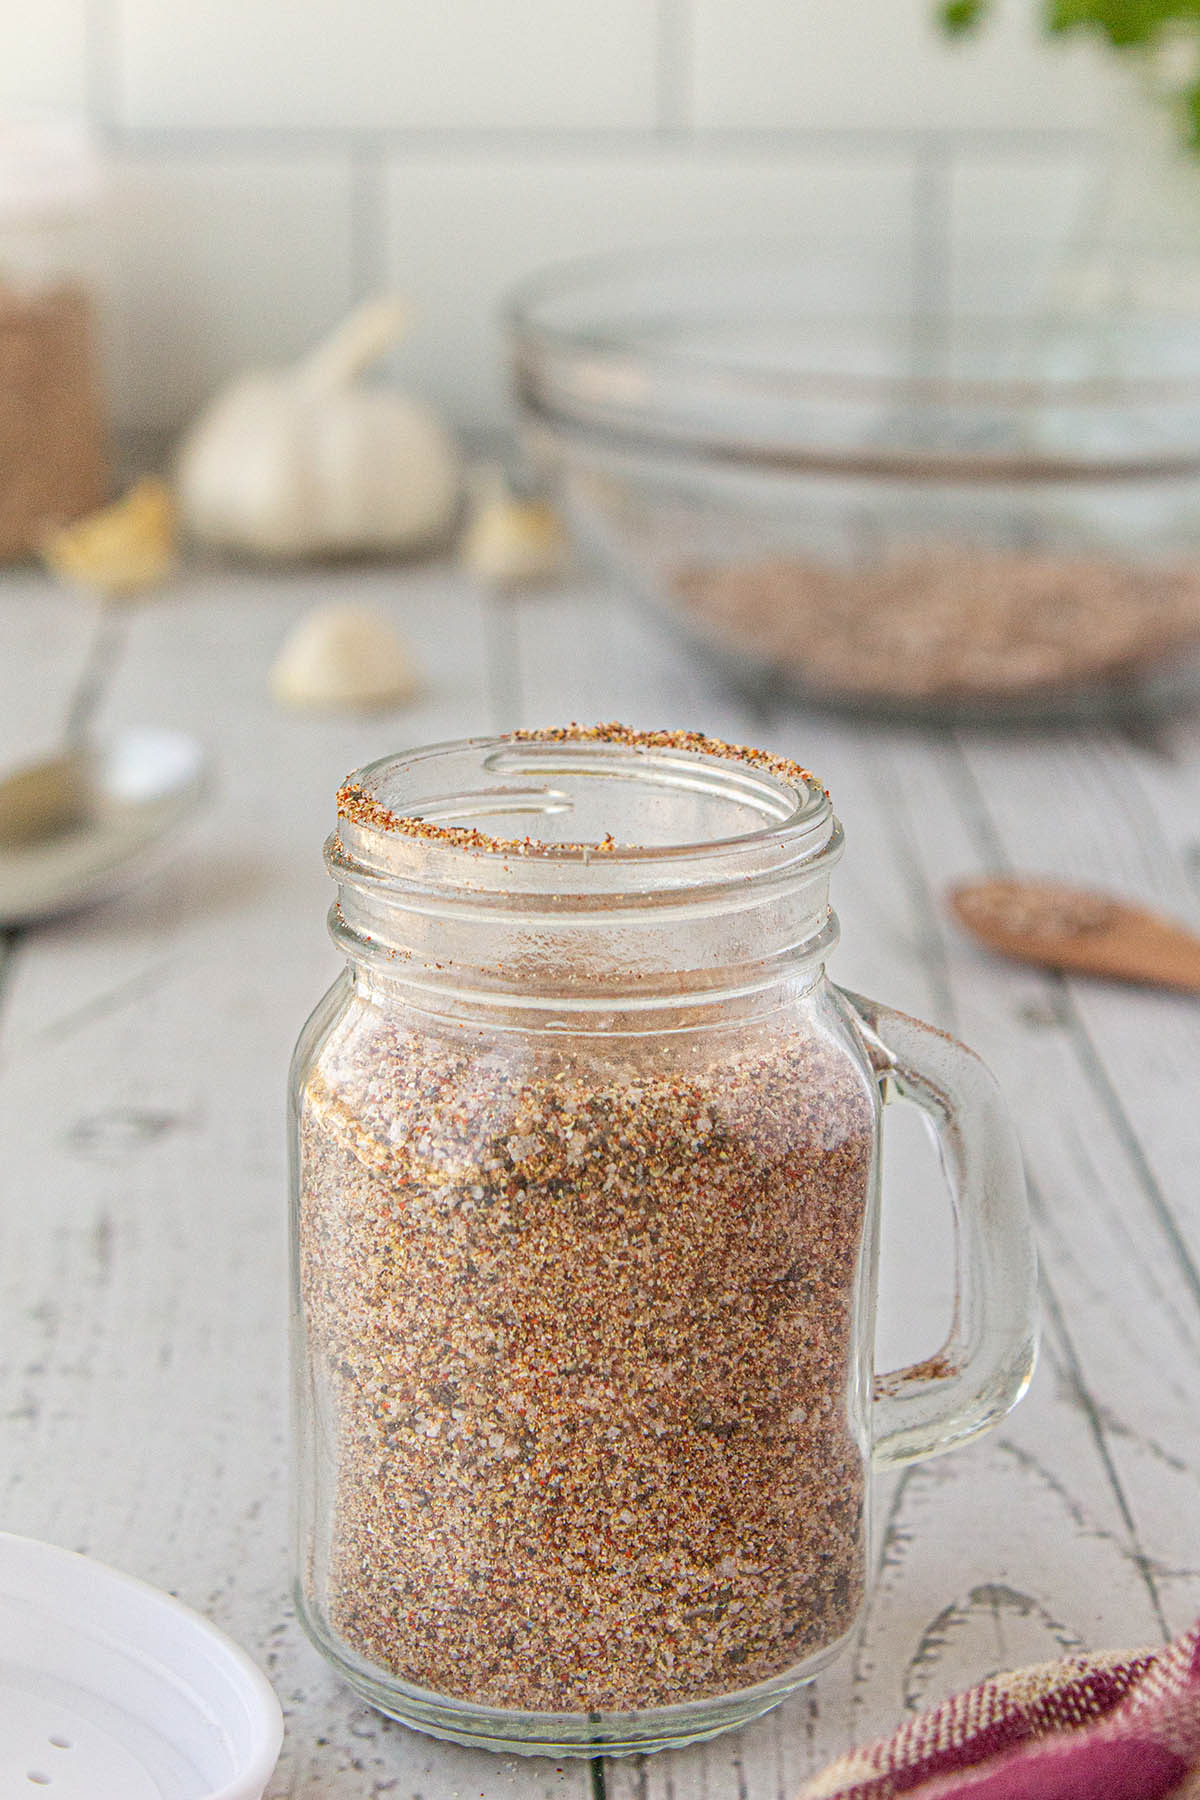 Chicken Seasoning Blend in a spice container.